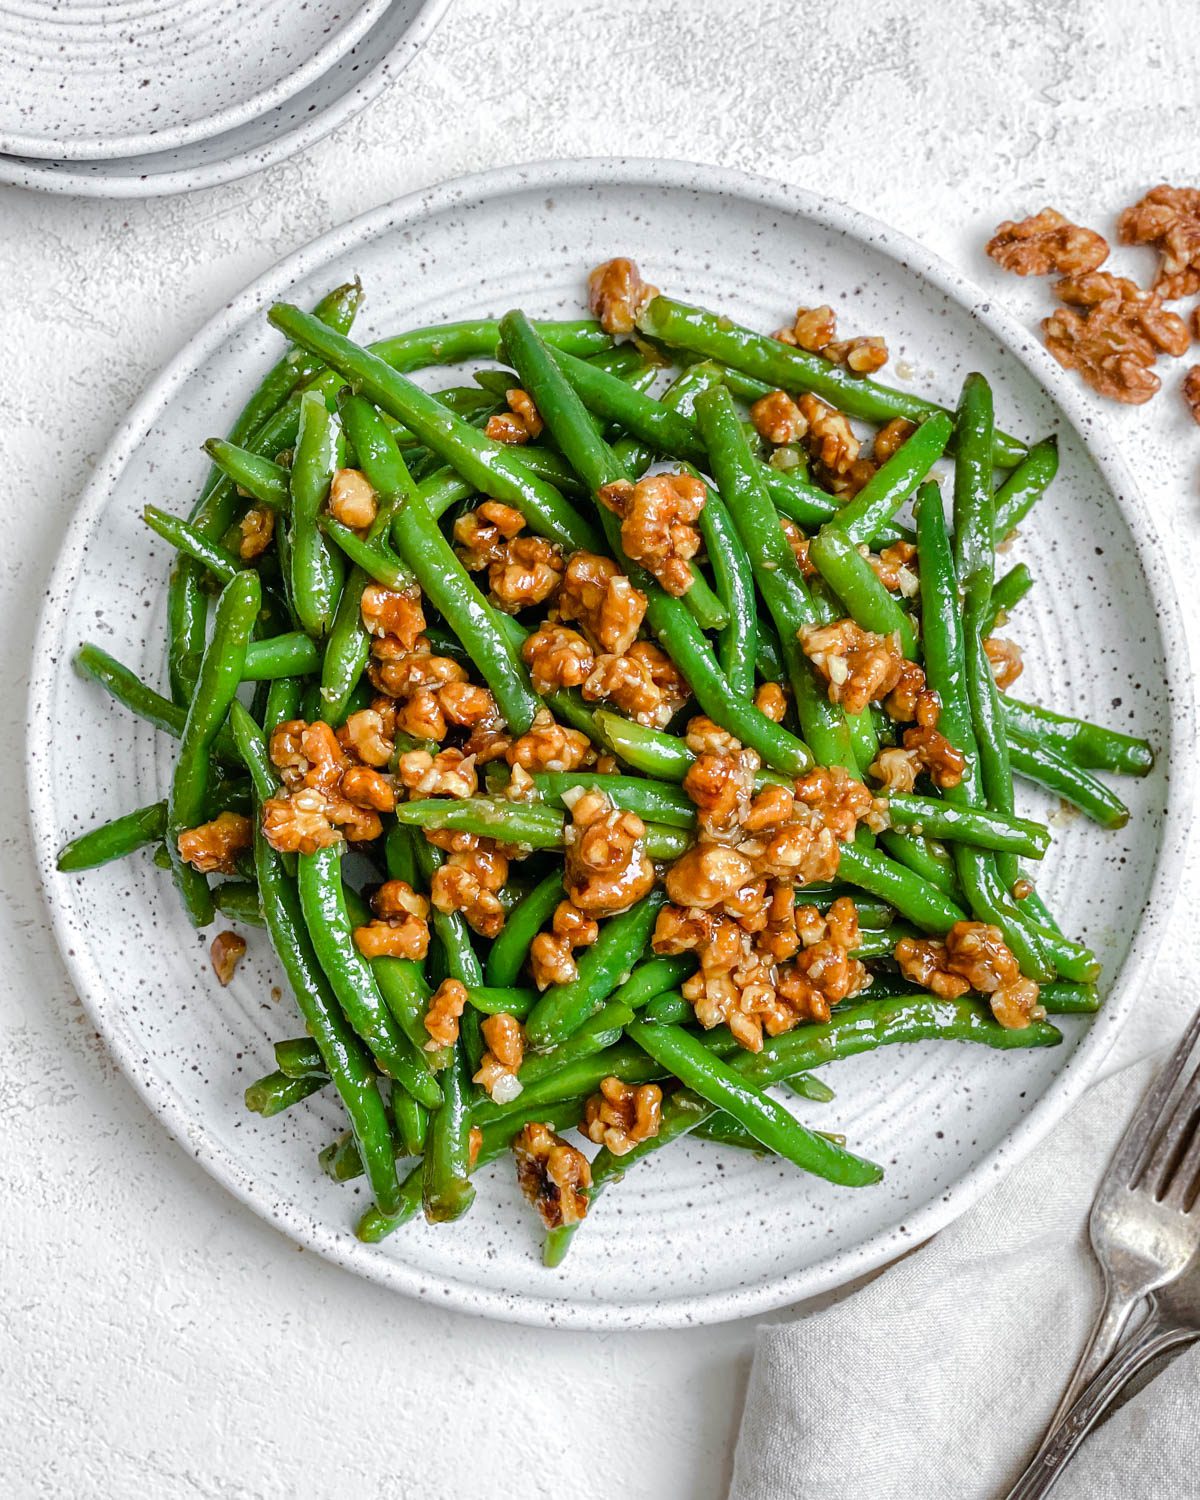 completed Brown Sugar Green Beans [No Bacon] plated on a white plate against a white surface